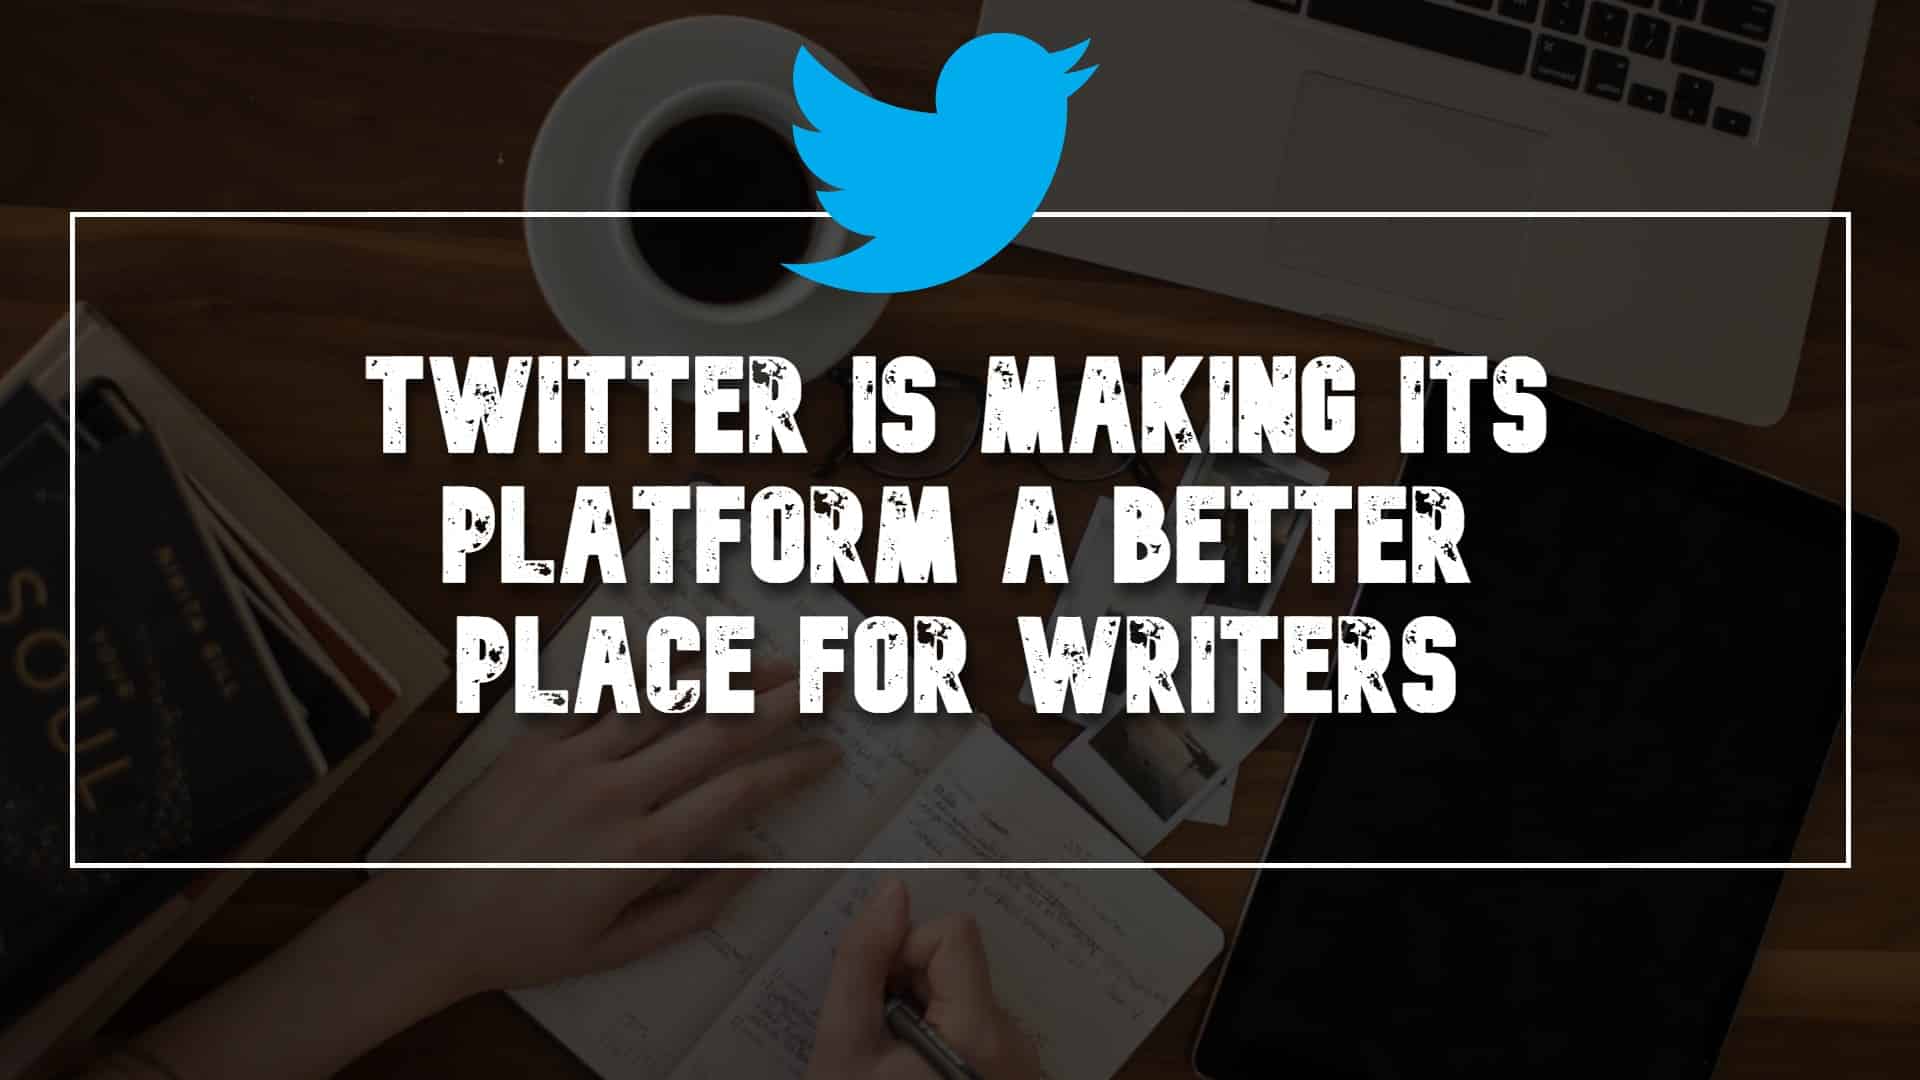 Twitter is Making It a Platform a Better Place for Writers